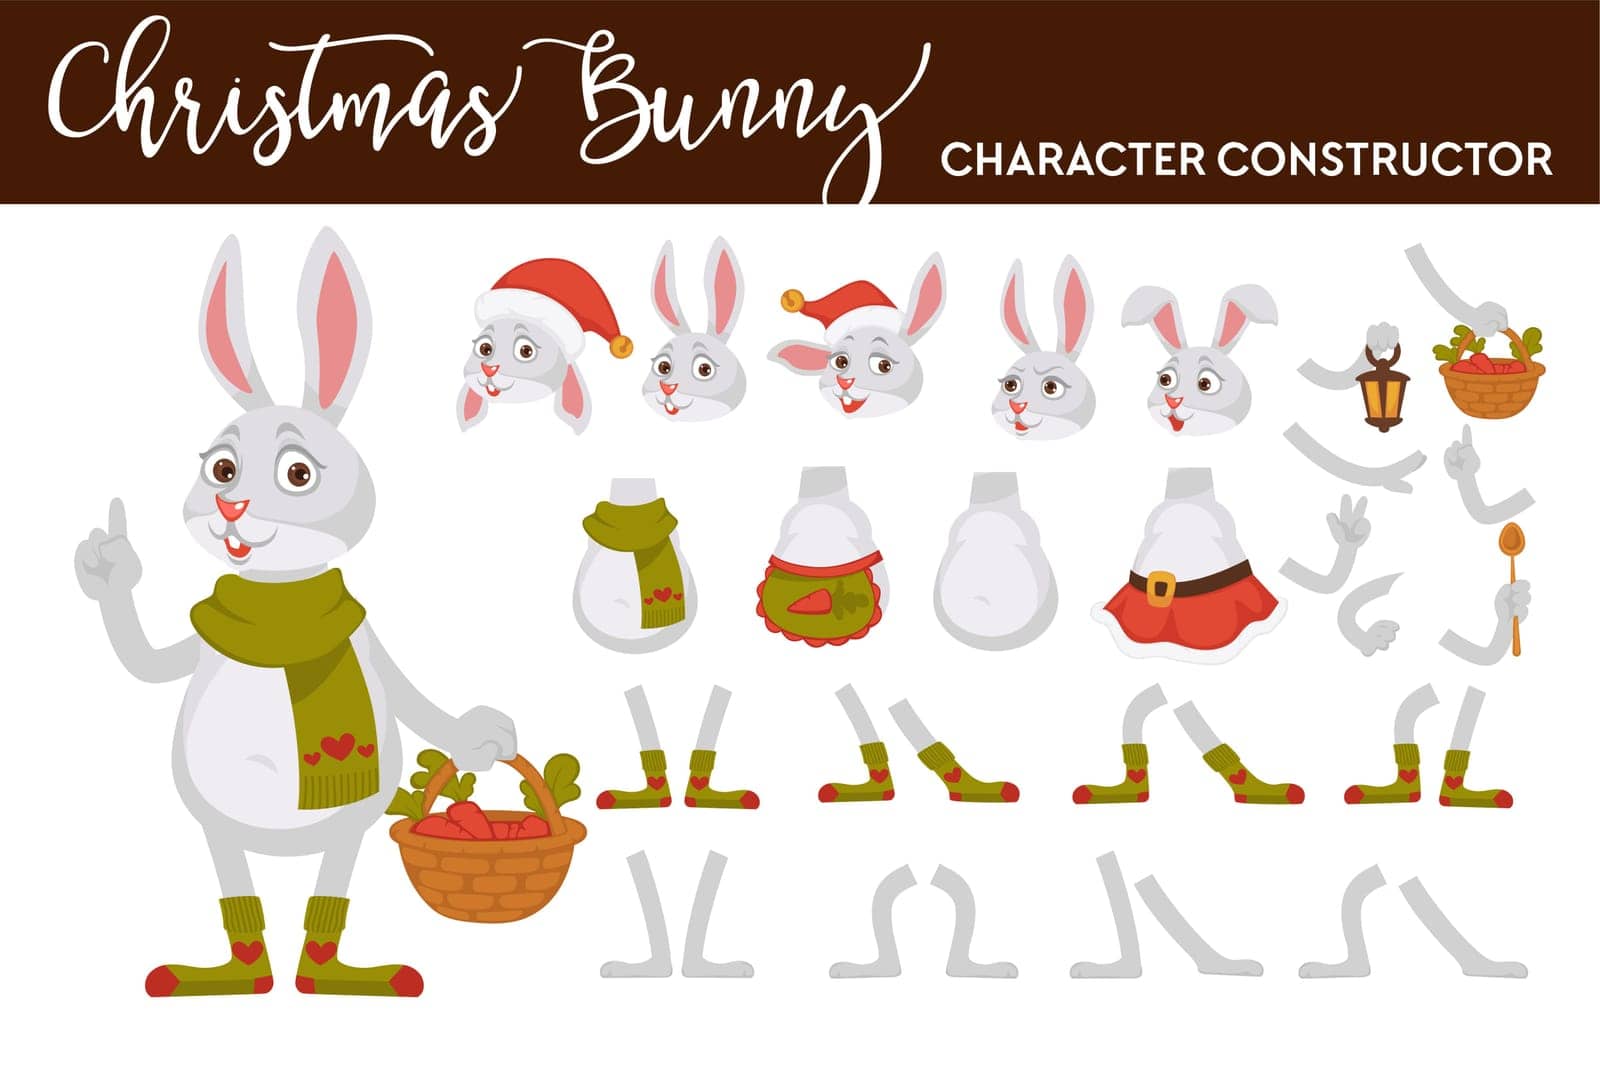 Christmas bunny character isolated body parts and accessory vector hare or rabbit with wicker basket and scarf head and paws clothes socks and carrots lantern and Santa hat spoon and apron or skirt.